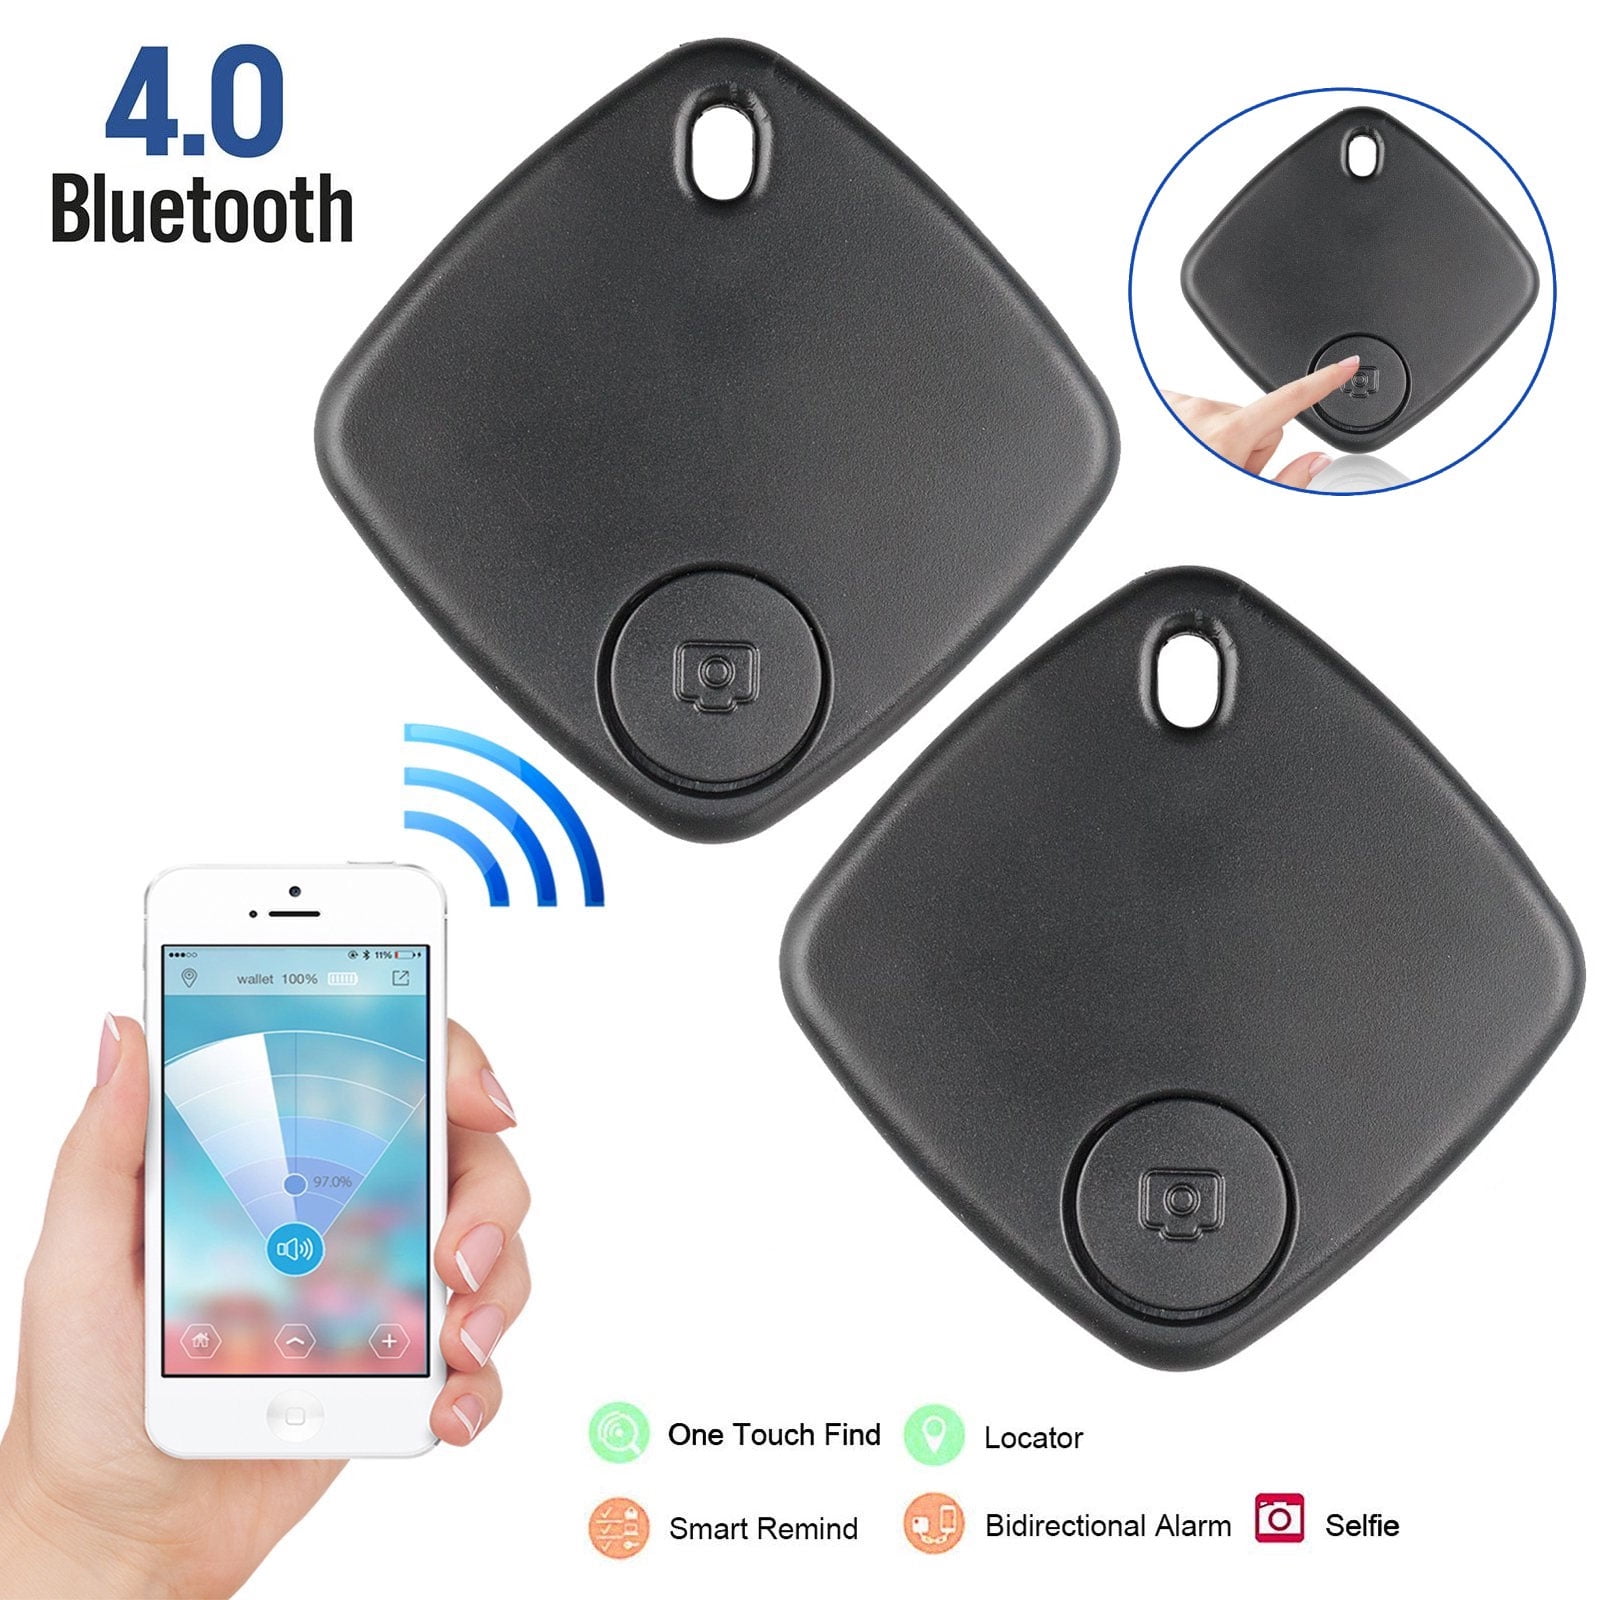 Wallet TrackR Bluetooth Tracking Device for Phone GPS Purse Keys Pets Bike NEW 